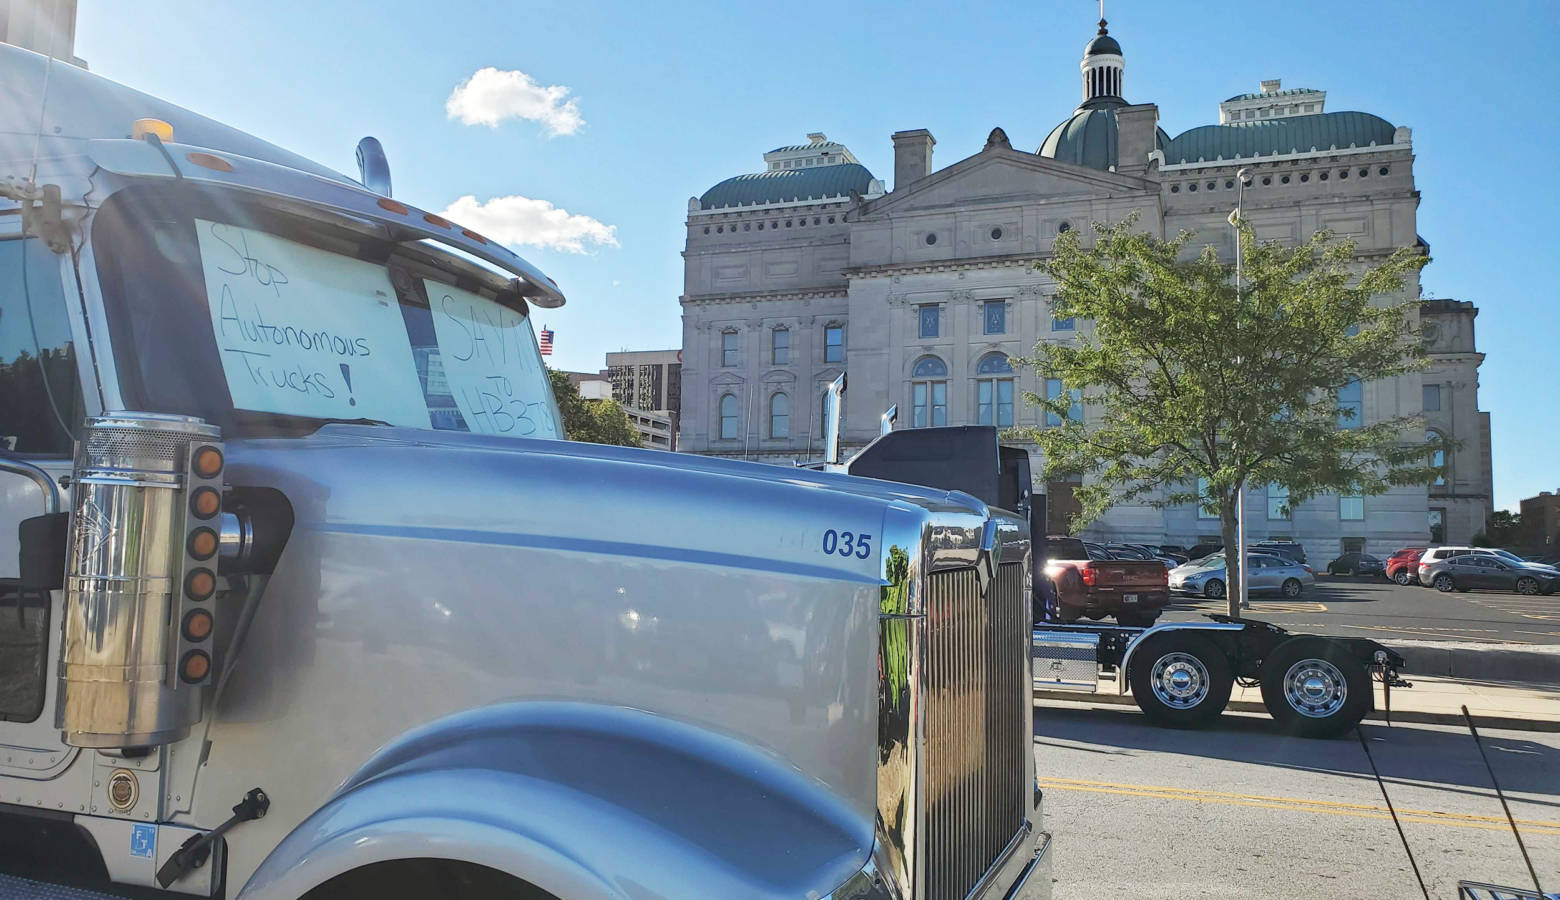 Commercial drivers parked trucks in front of the Statehouse to protest future autonomous vehicle legislation. (Samantha Horton/IPB News)